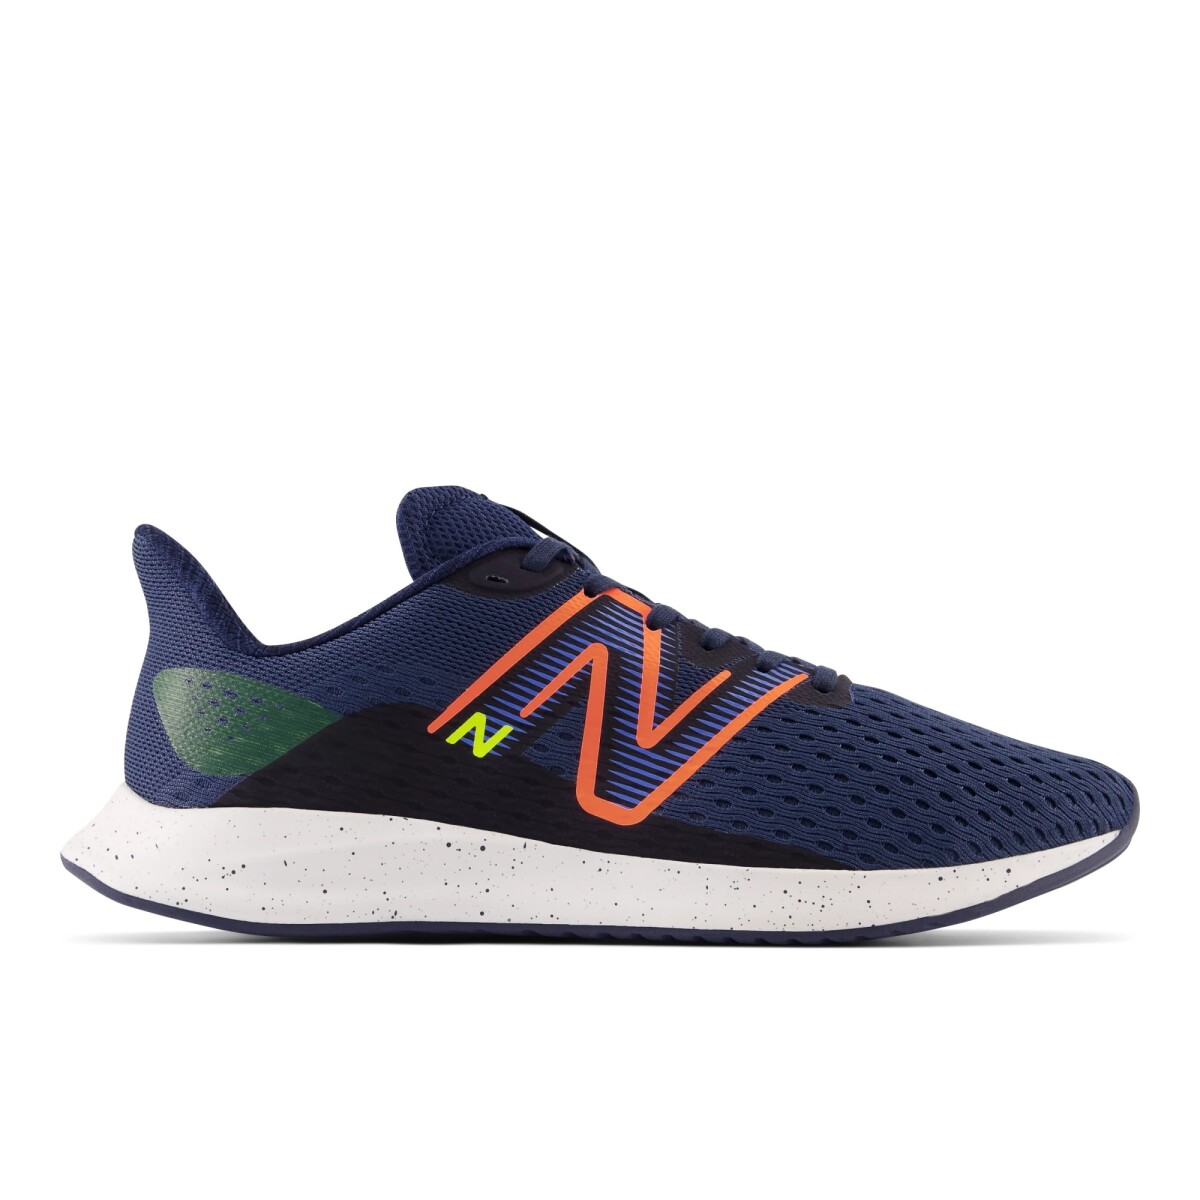 Championes New Balance de hombre - LOWKY - MLWKRBO1 - NAVY 